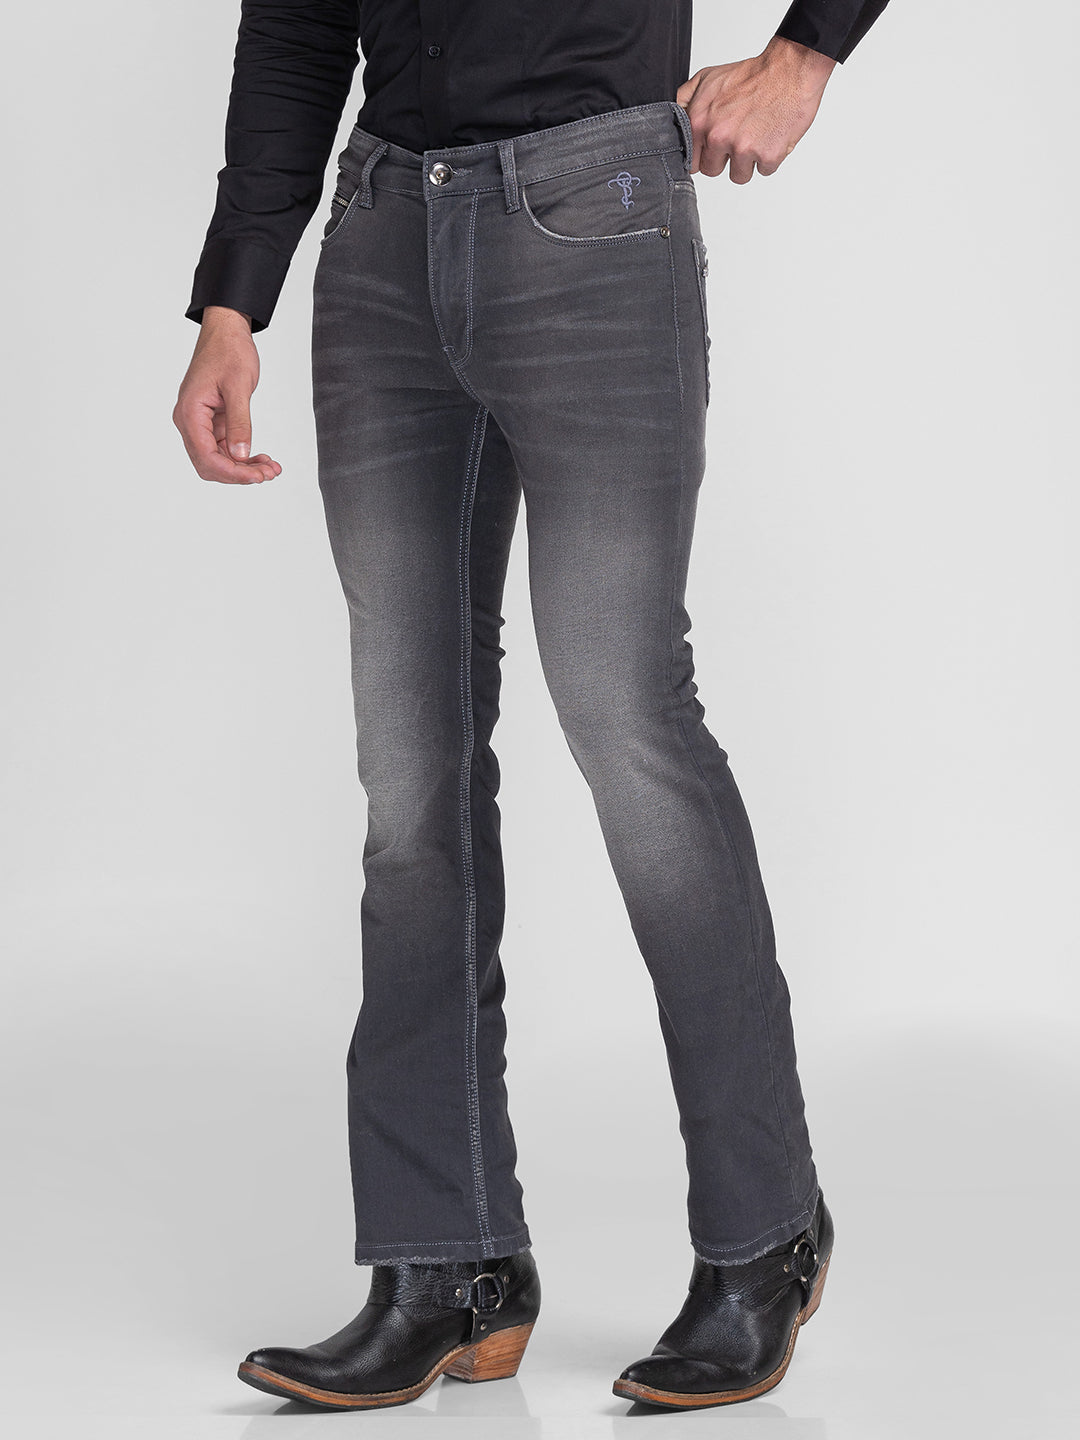 Grey Bootcut Jeans for Men